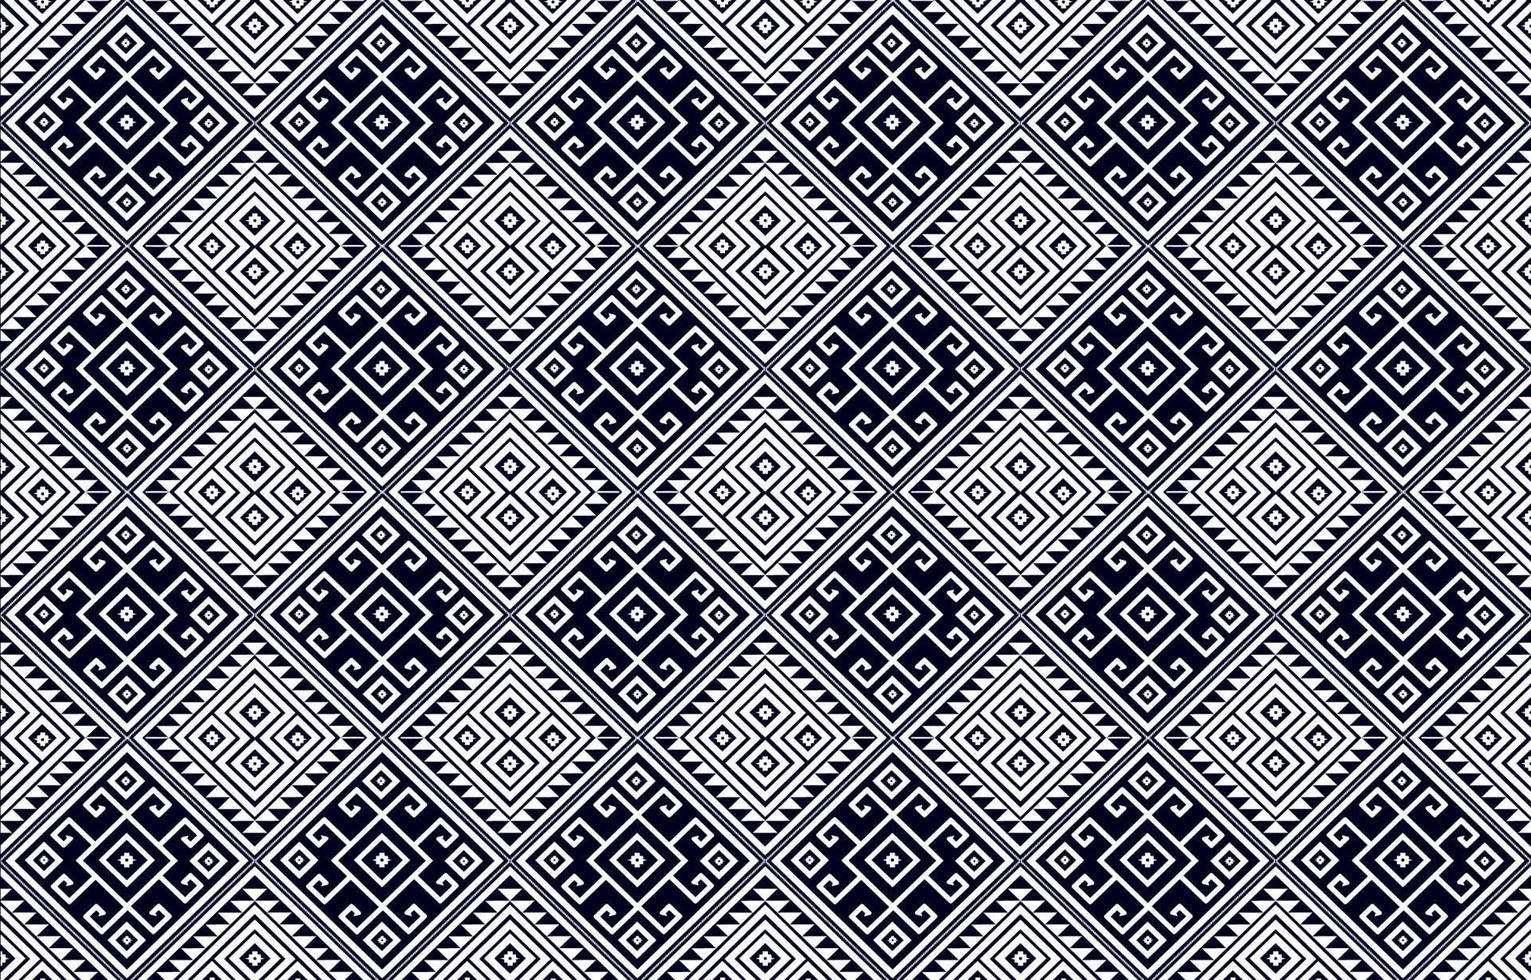 Geometric ethnic pattern Oriental and Asia traditional style. black and white. Design for tile, ceramic, background, wallpaper, clothing, wrapping paper, fabric, and Vector illustration. pattern style